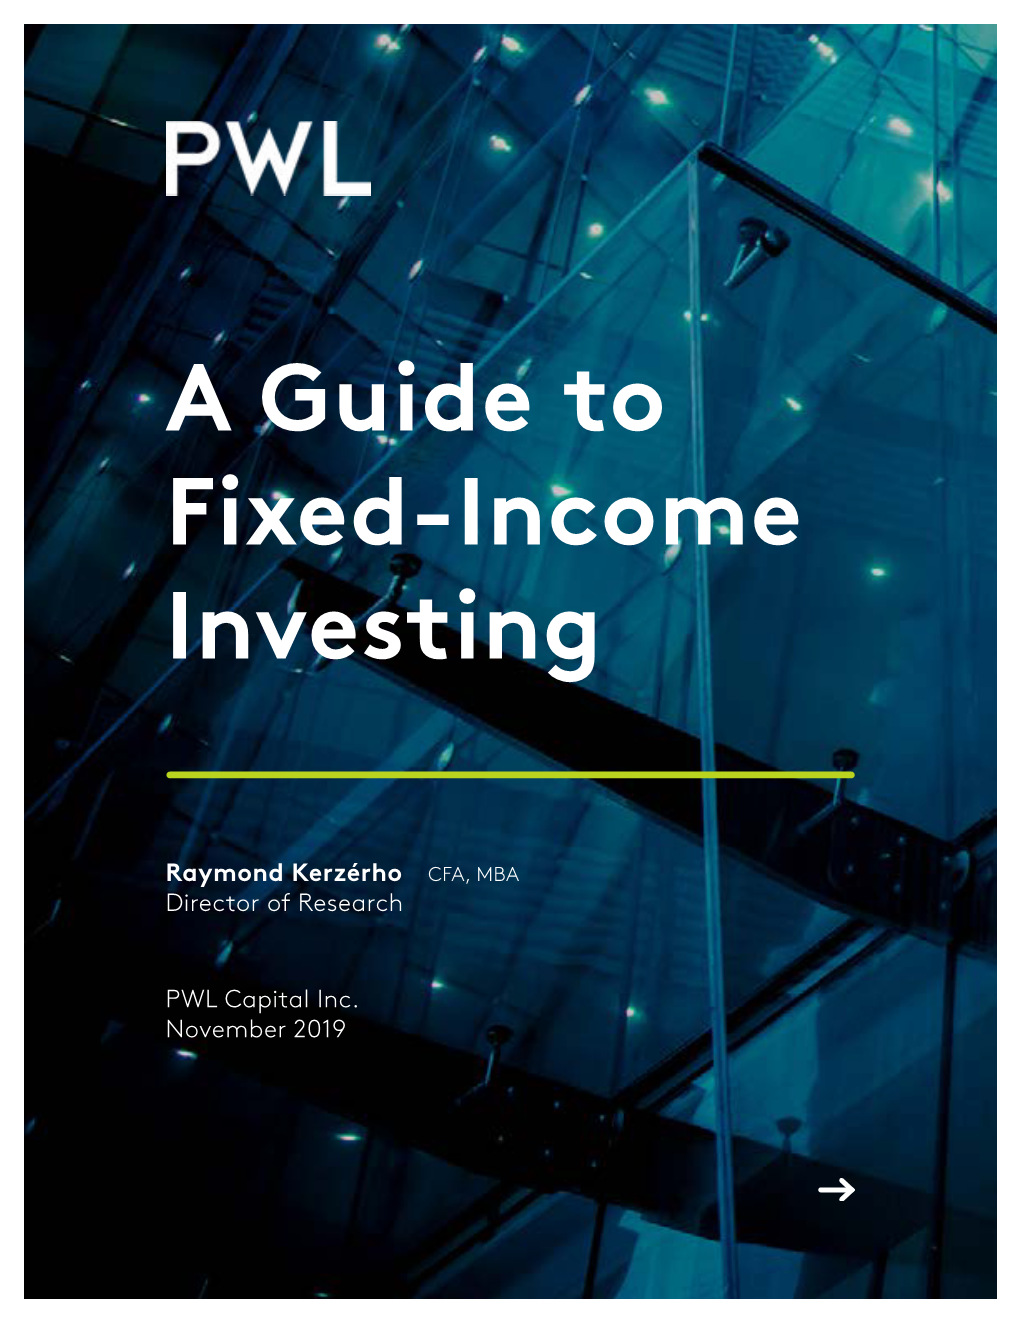 A Guide to Fixed-Income Investing